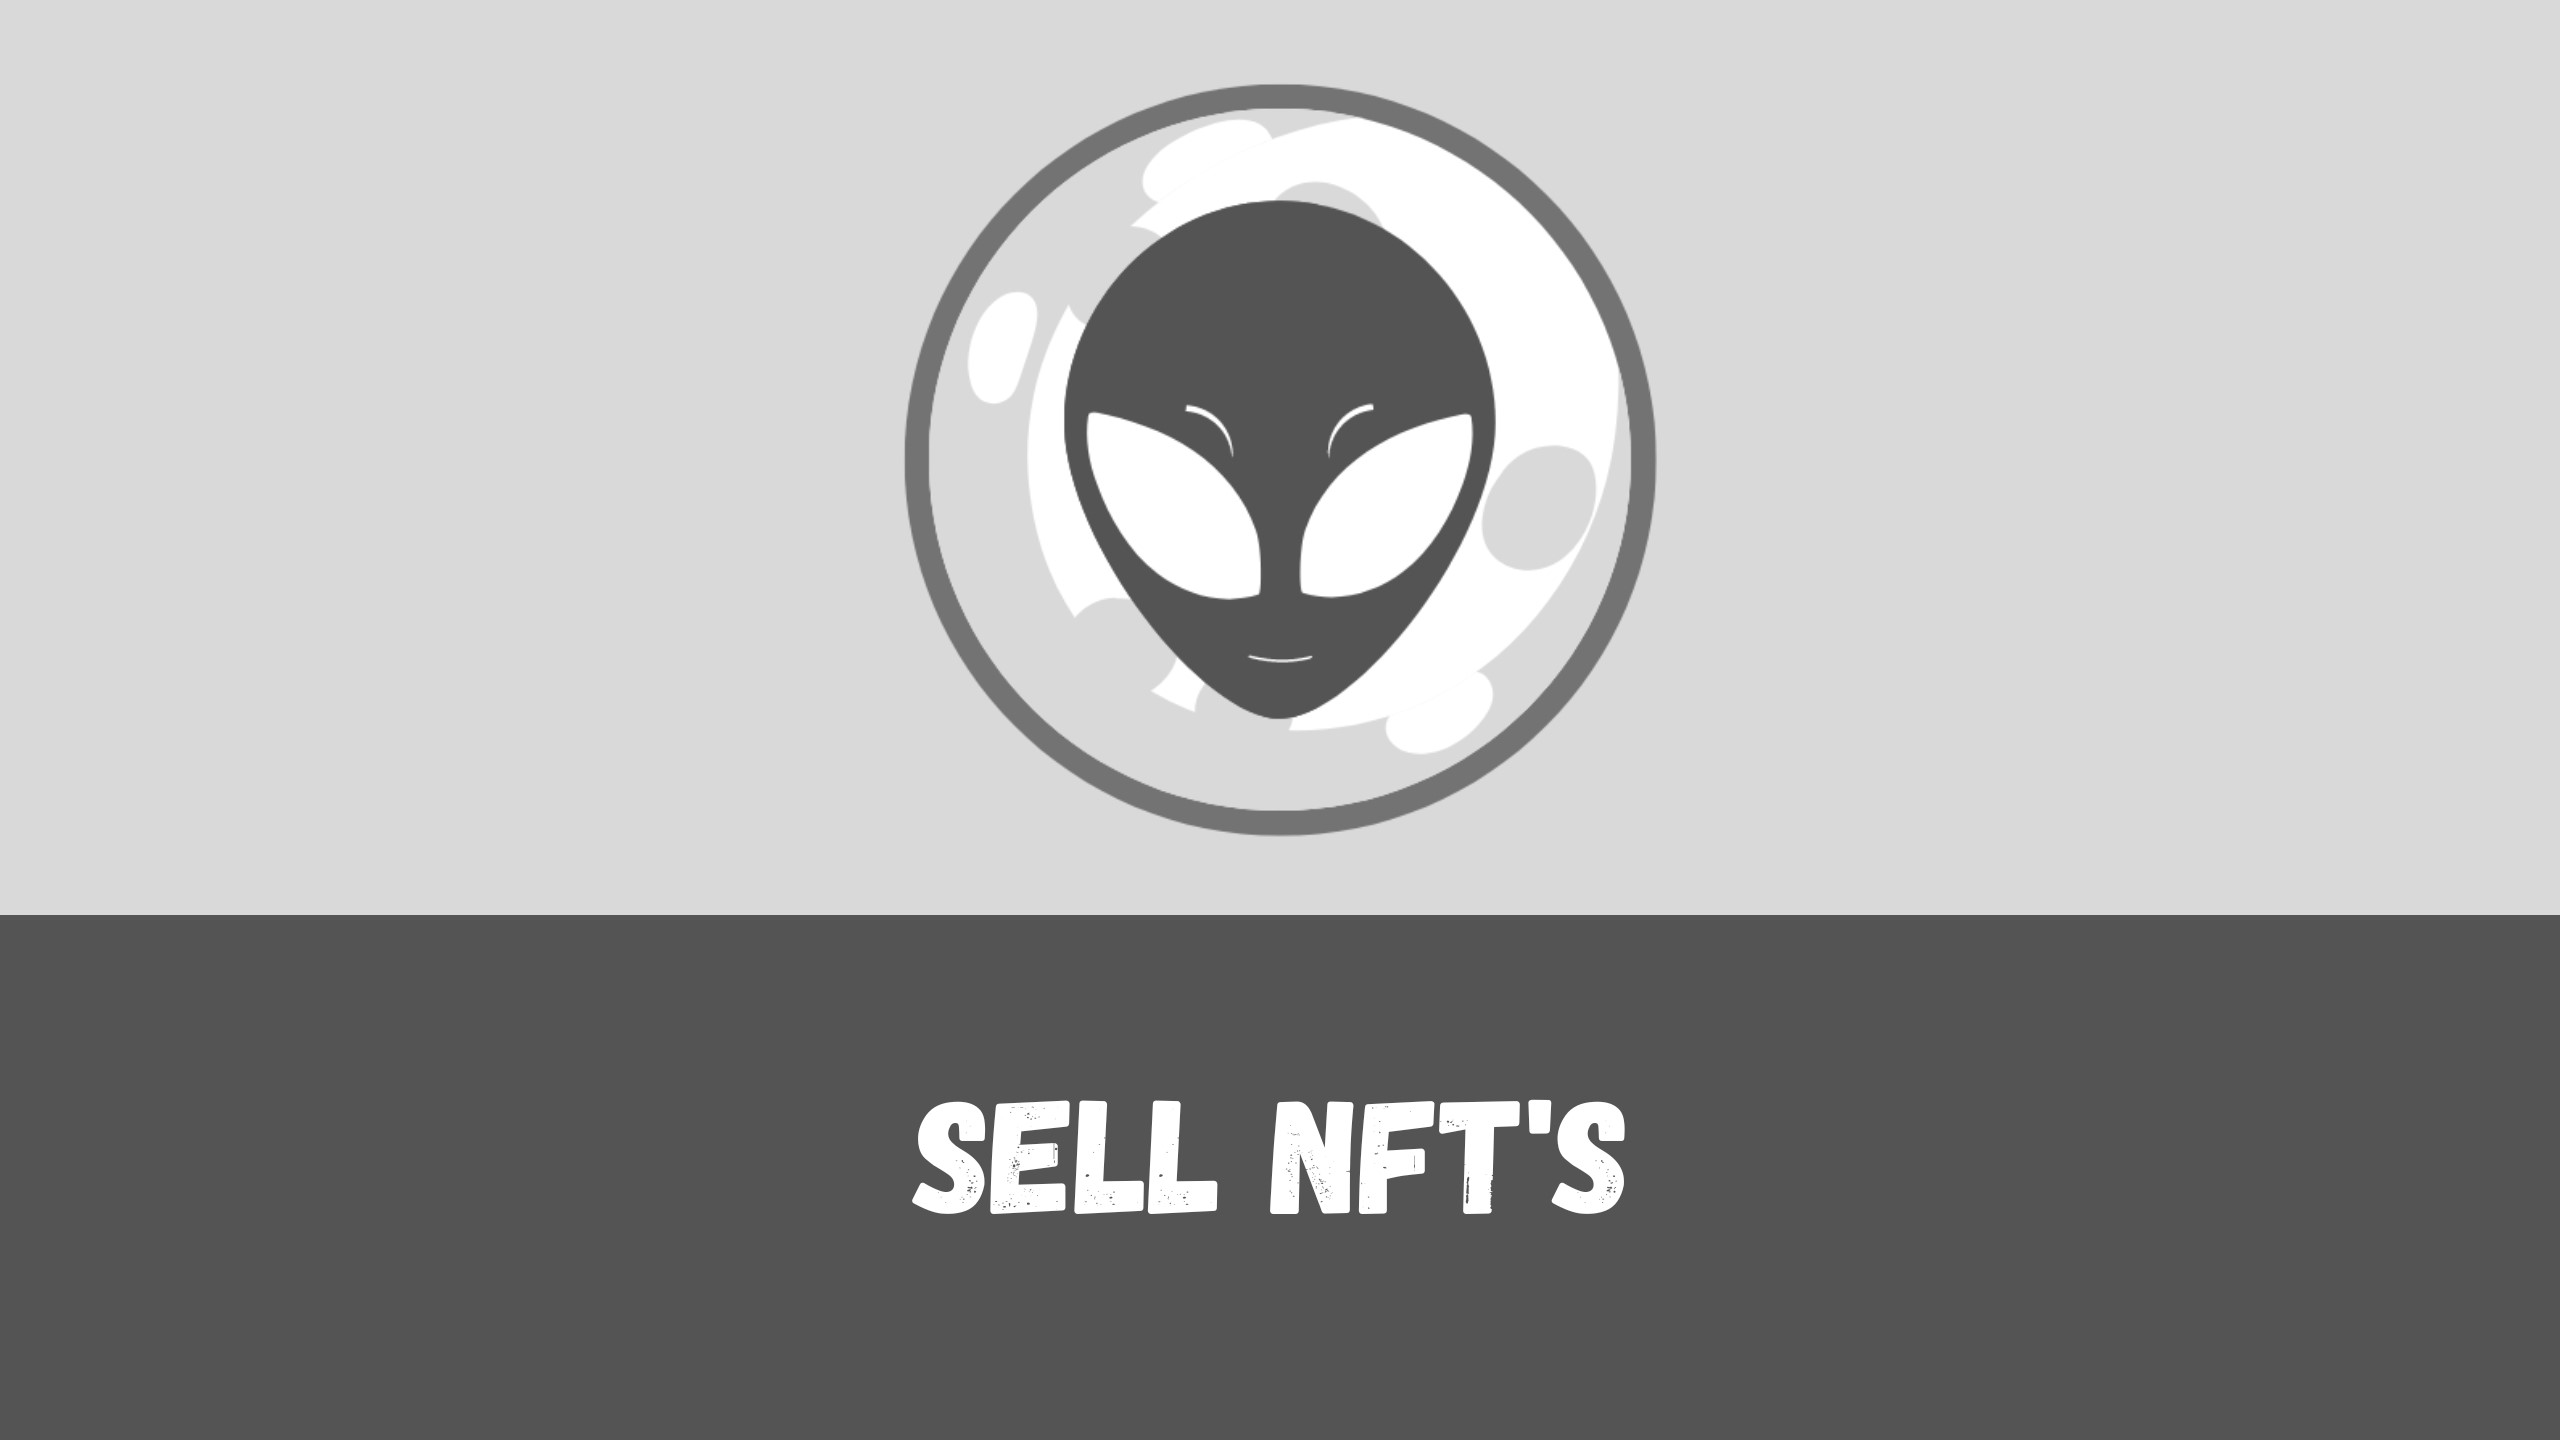 Sell NFTs